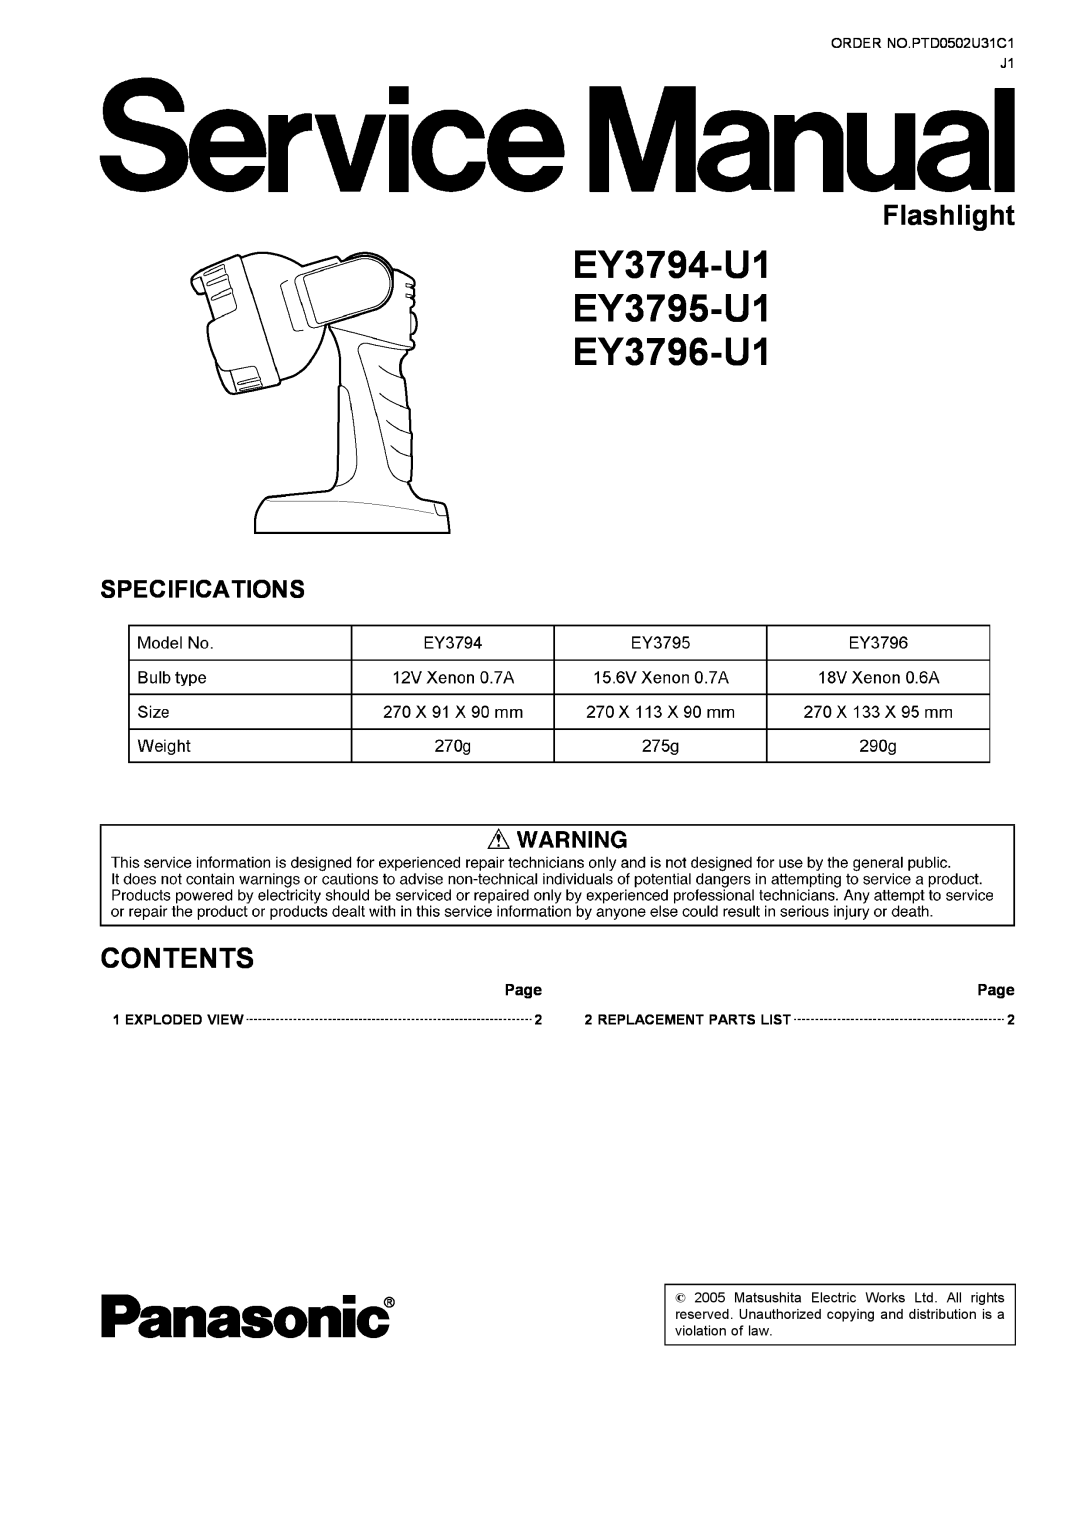 Panasonic specifications EY3794-U1 EY3795-U1 EY3796-U1, Flashlight, Contents, Specifications, Page, Exploded View 